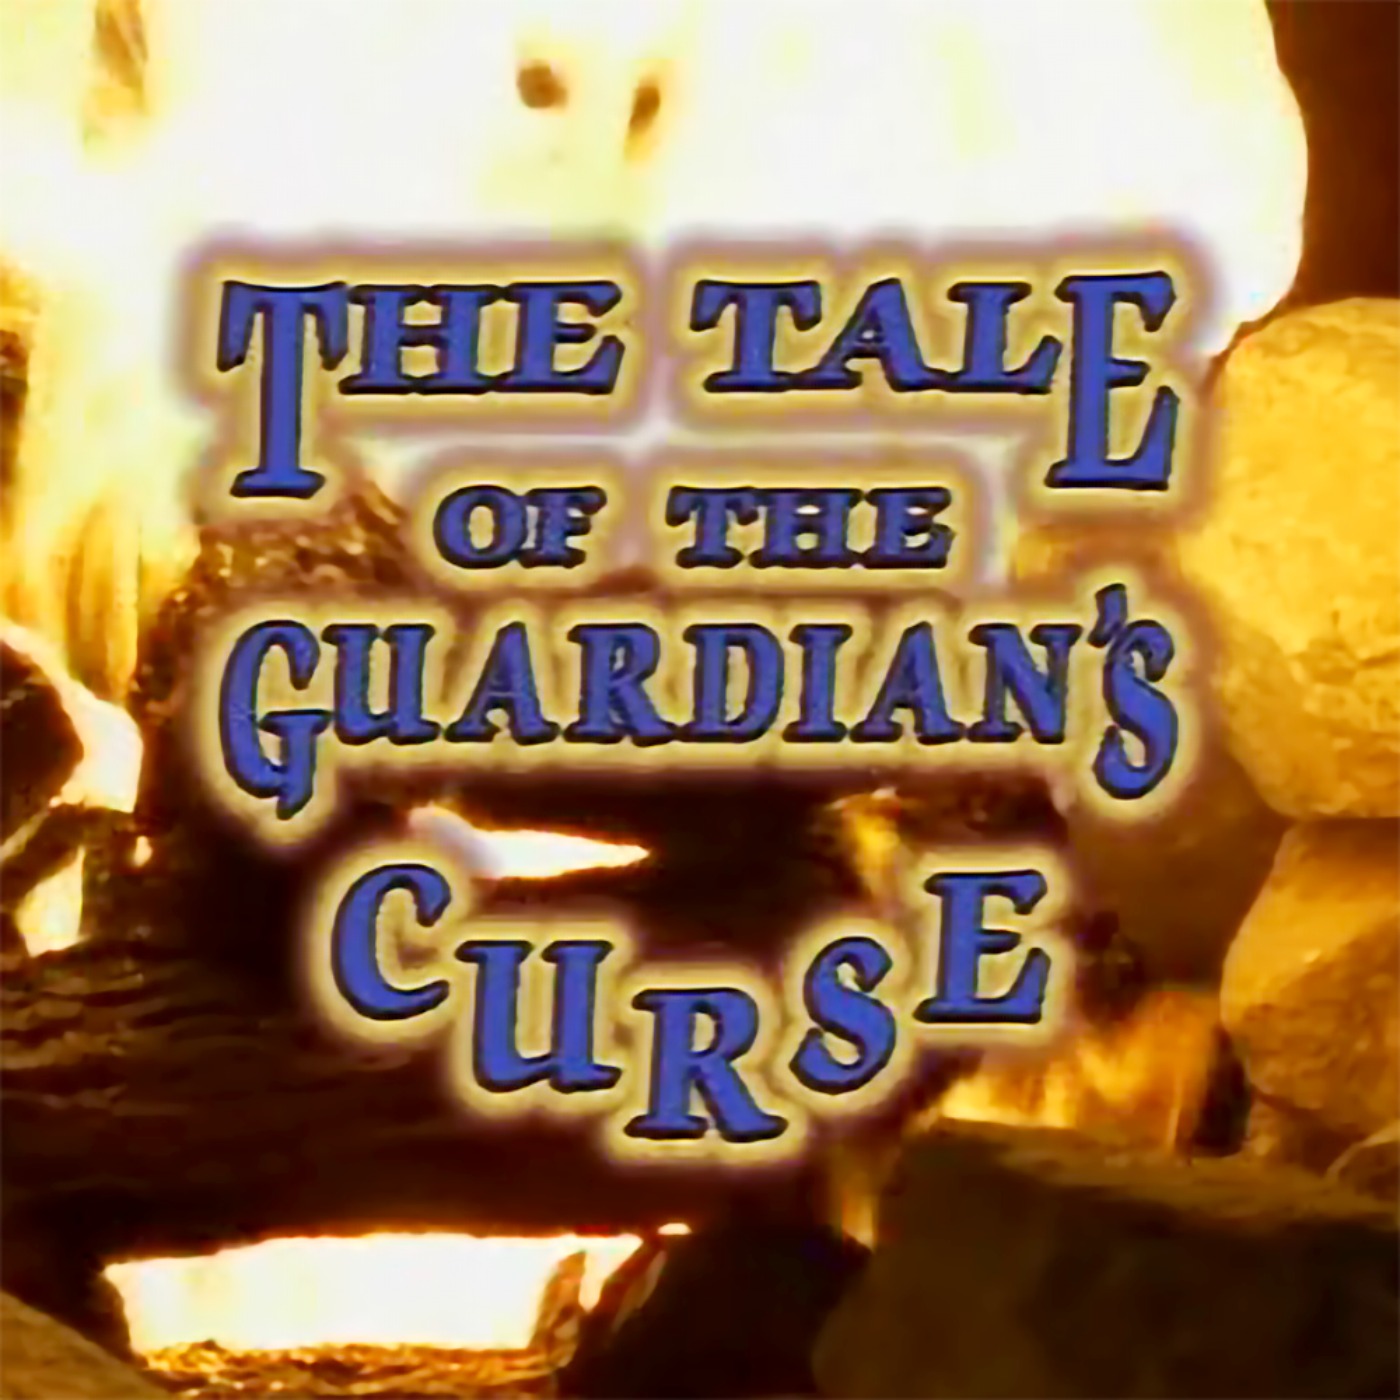 Are You Afraid of the Dark? - The Tale of the Guardian's Curse